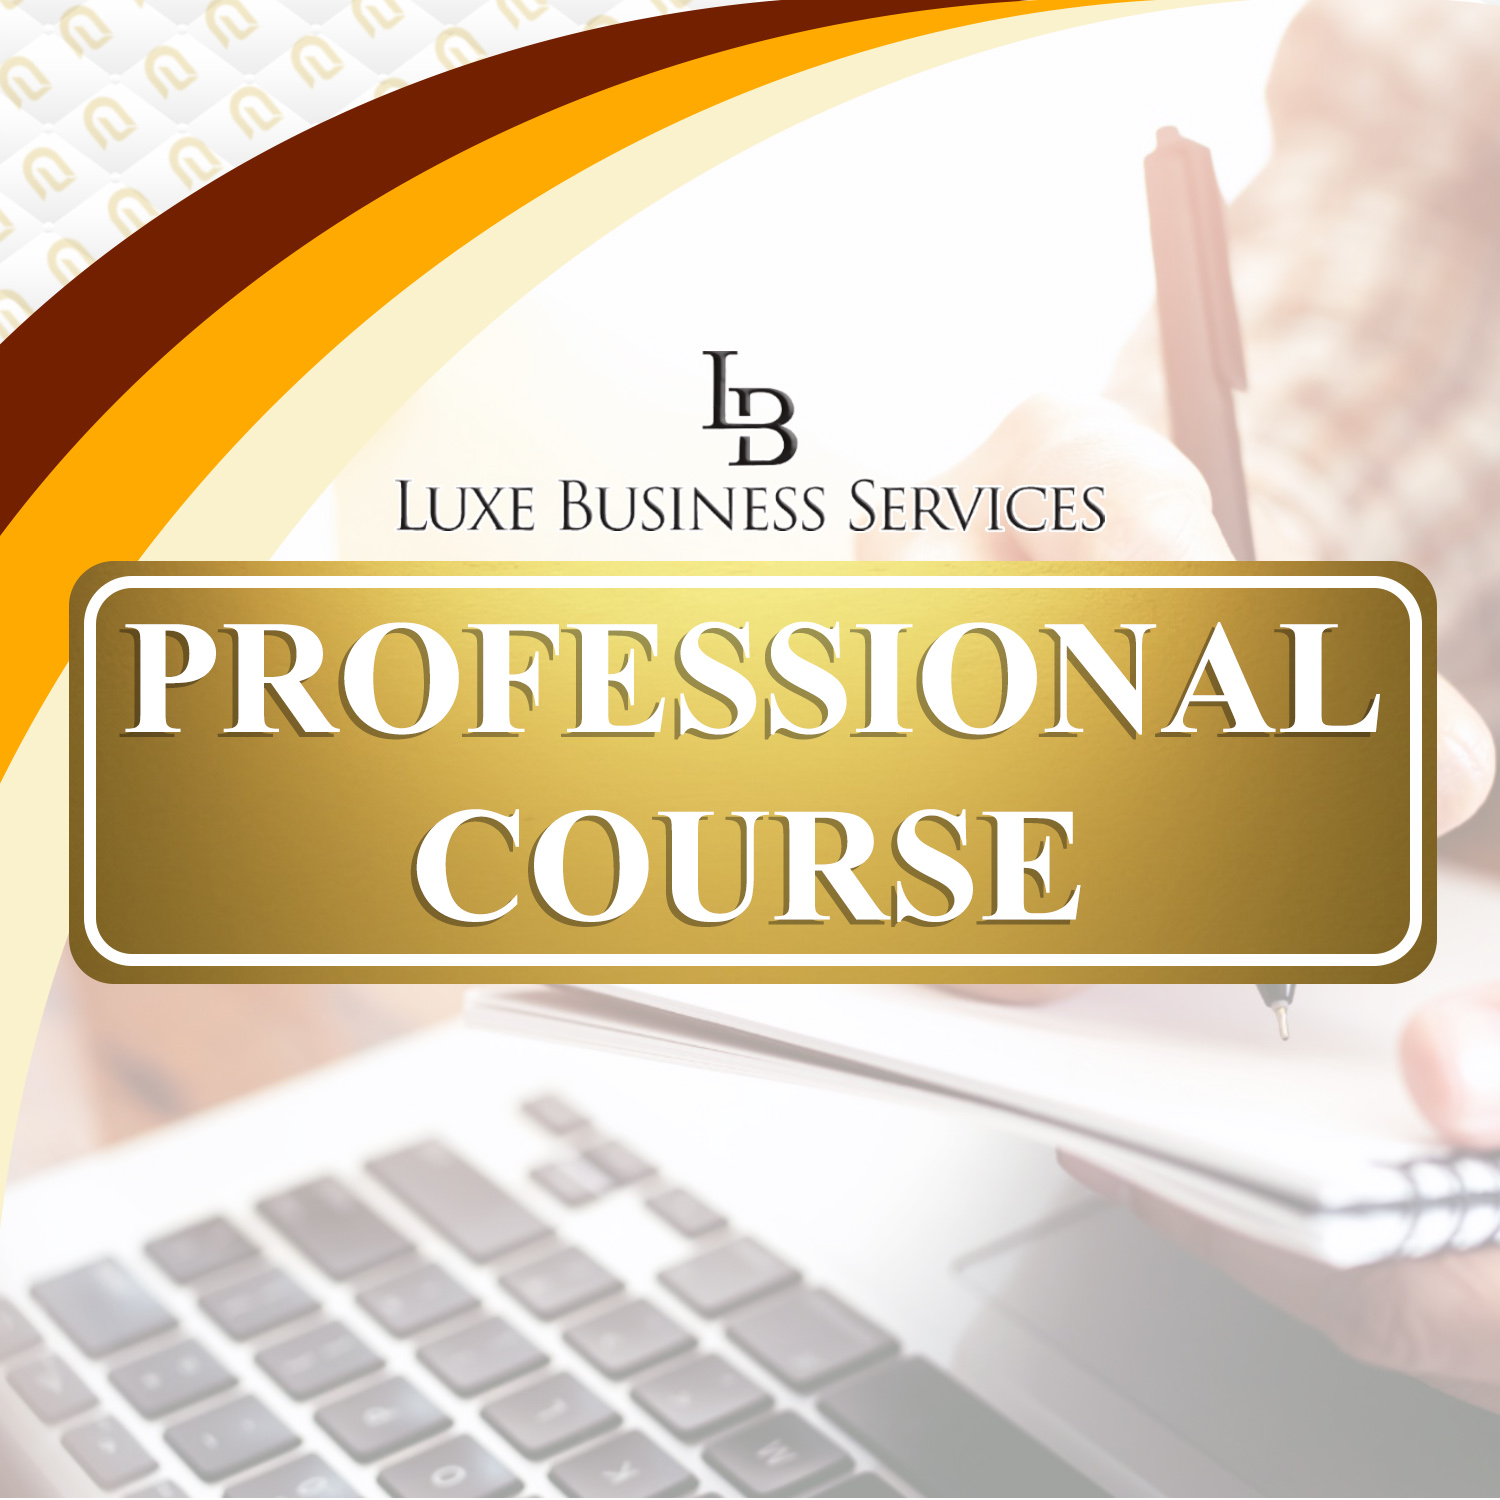 Professional_Course